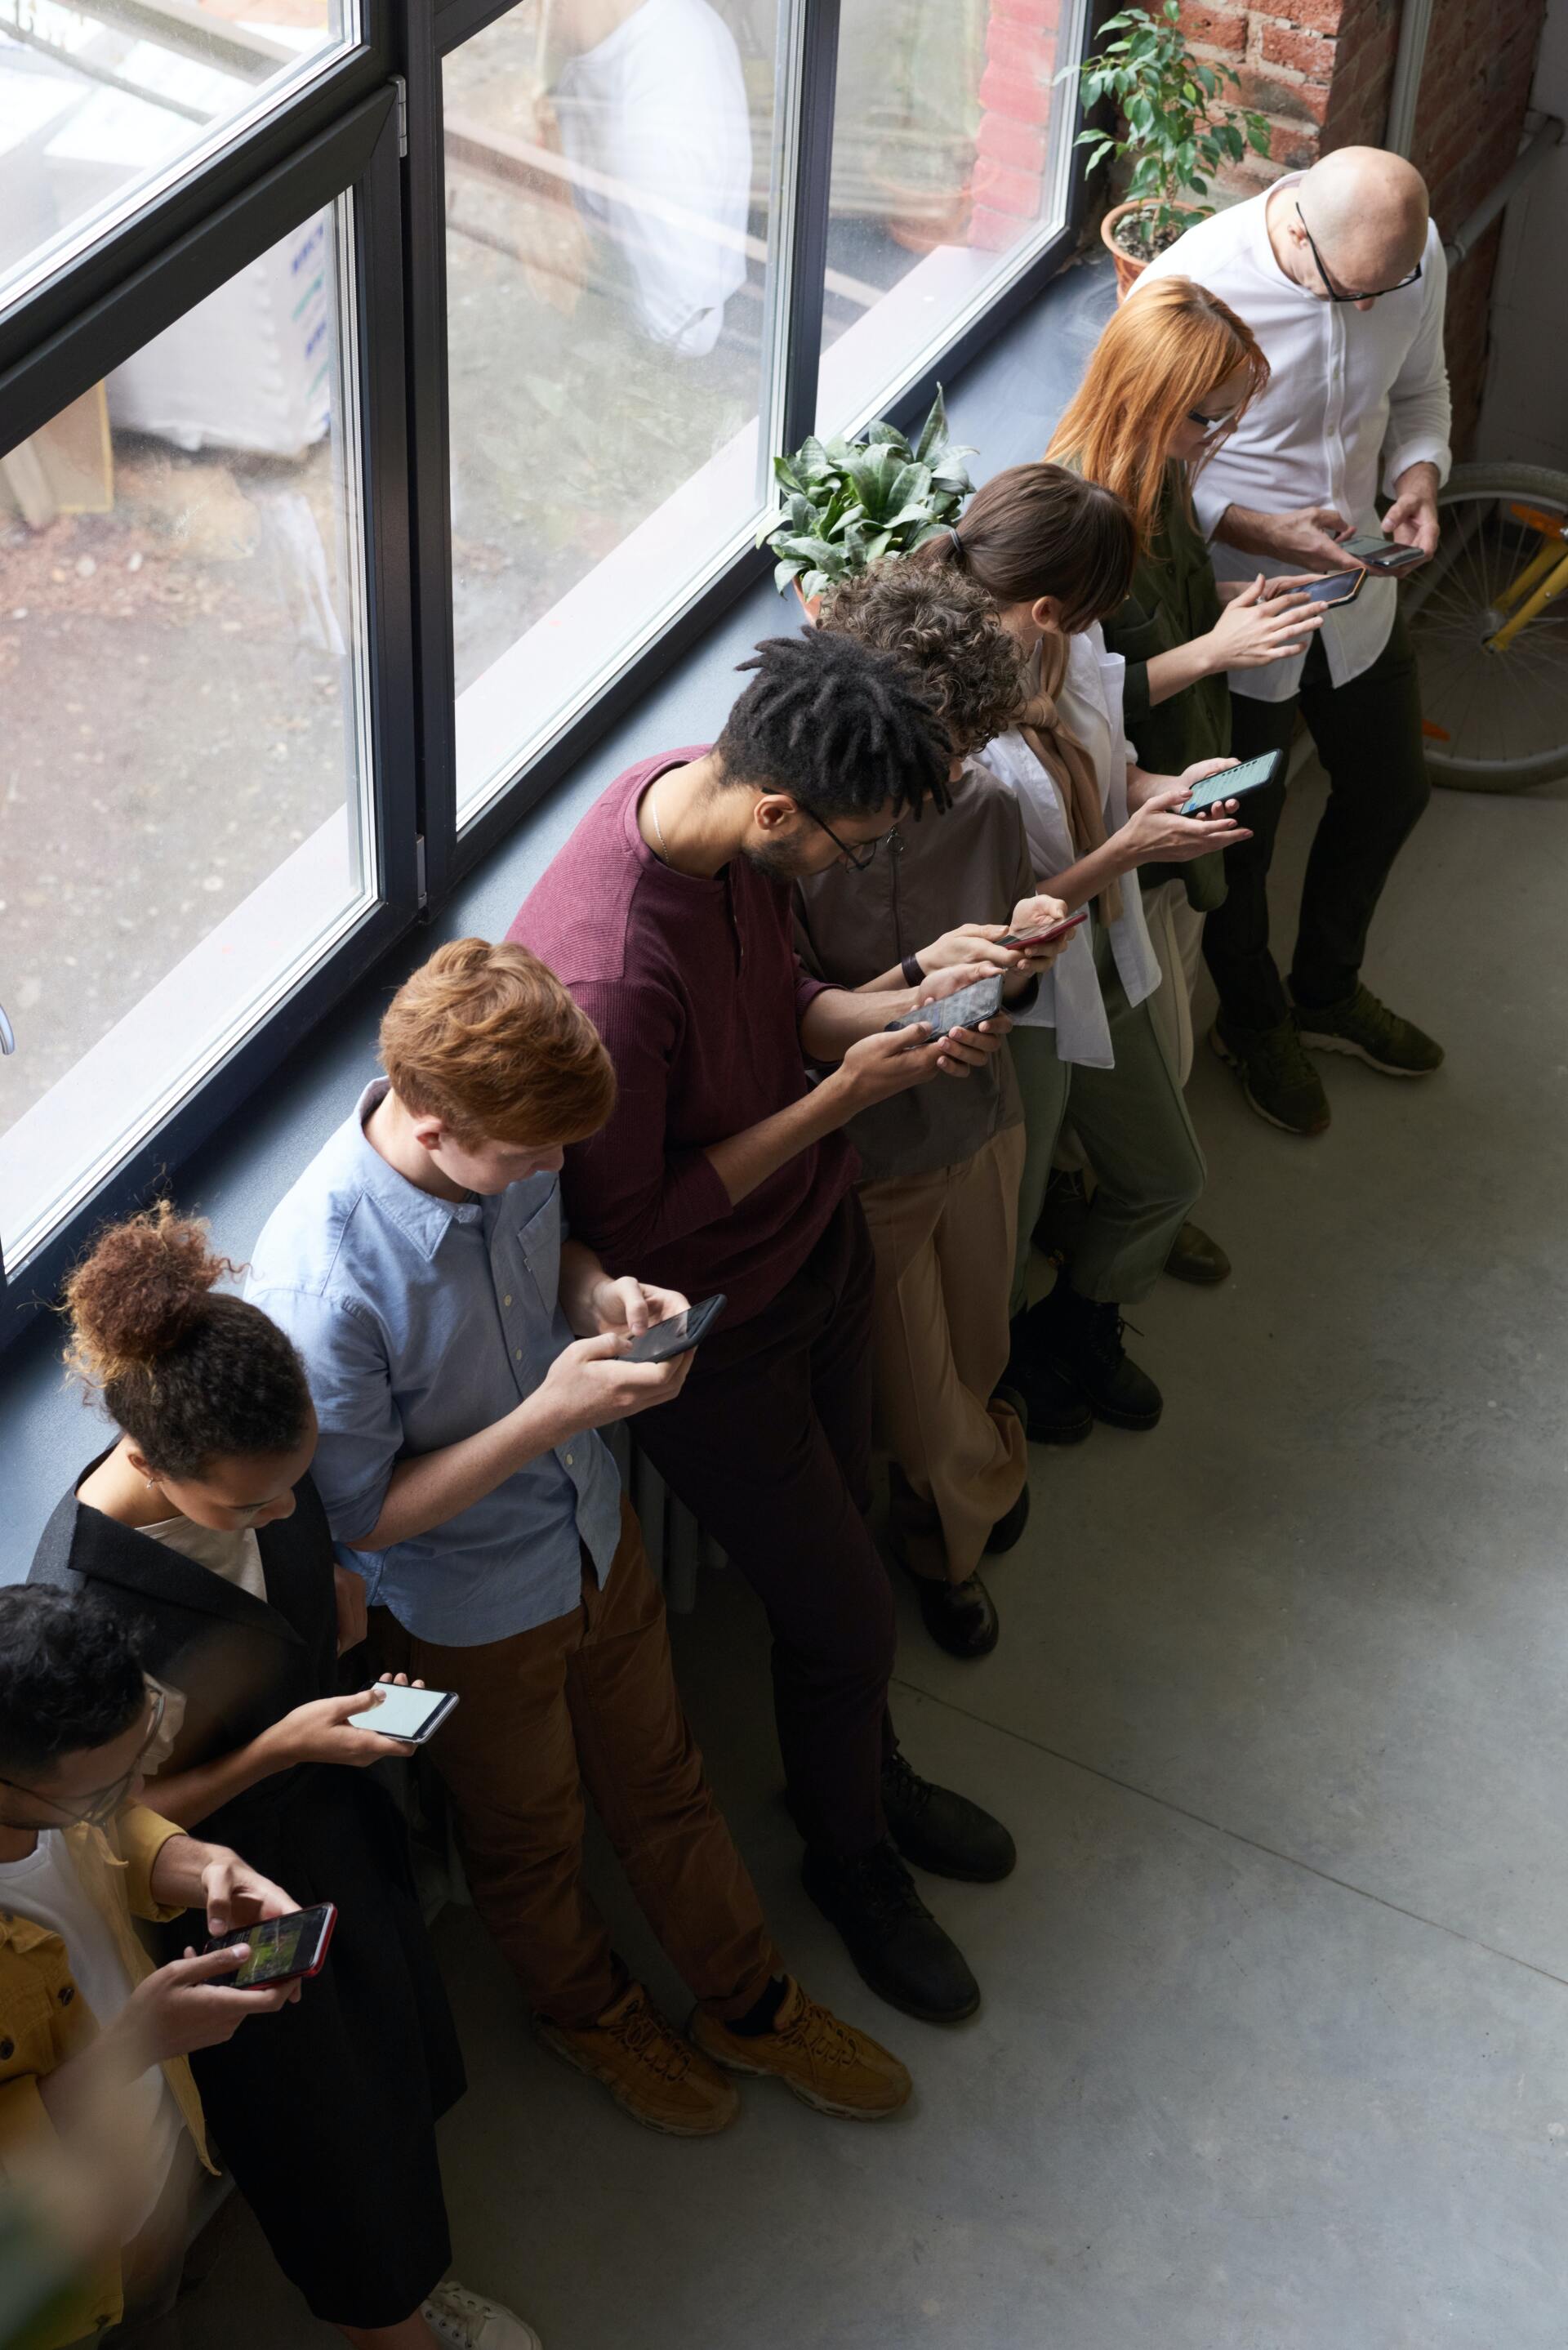 a group of people are standing in front of a window looking at their phones .